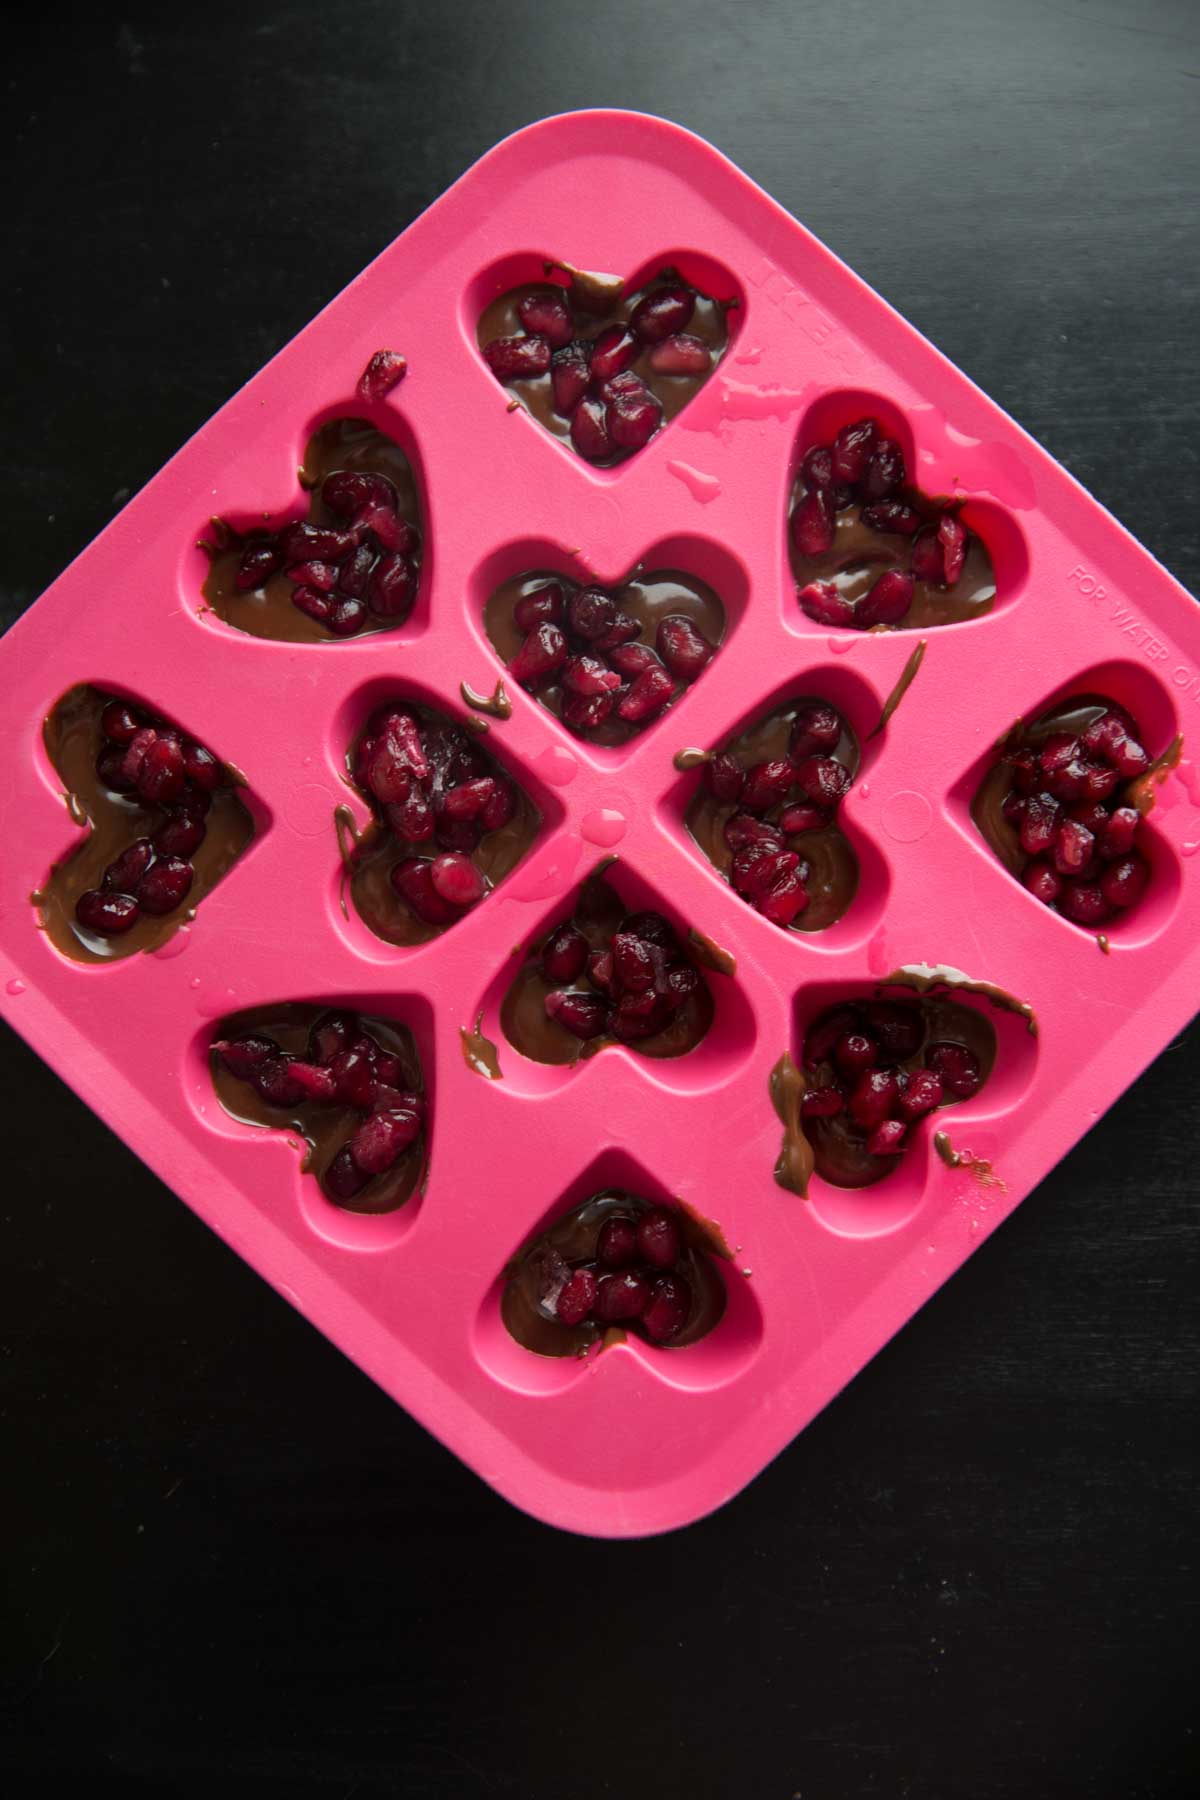 Chocolate Pomegranate Candy Recipe - melted chocolate in candy mold with pomegranate seeds